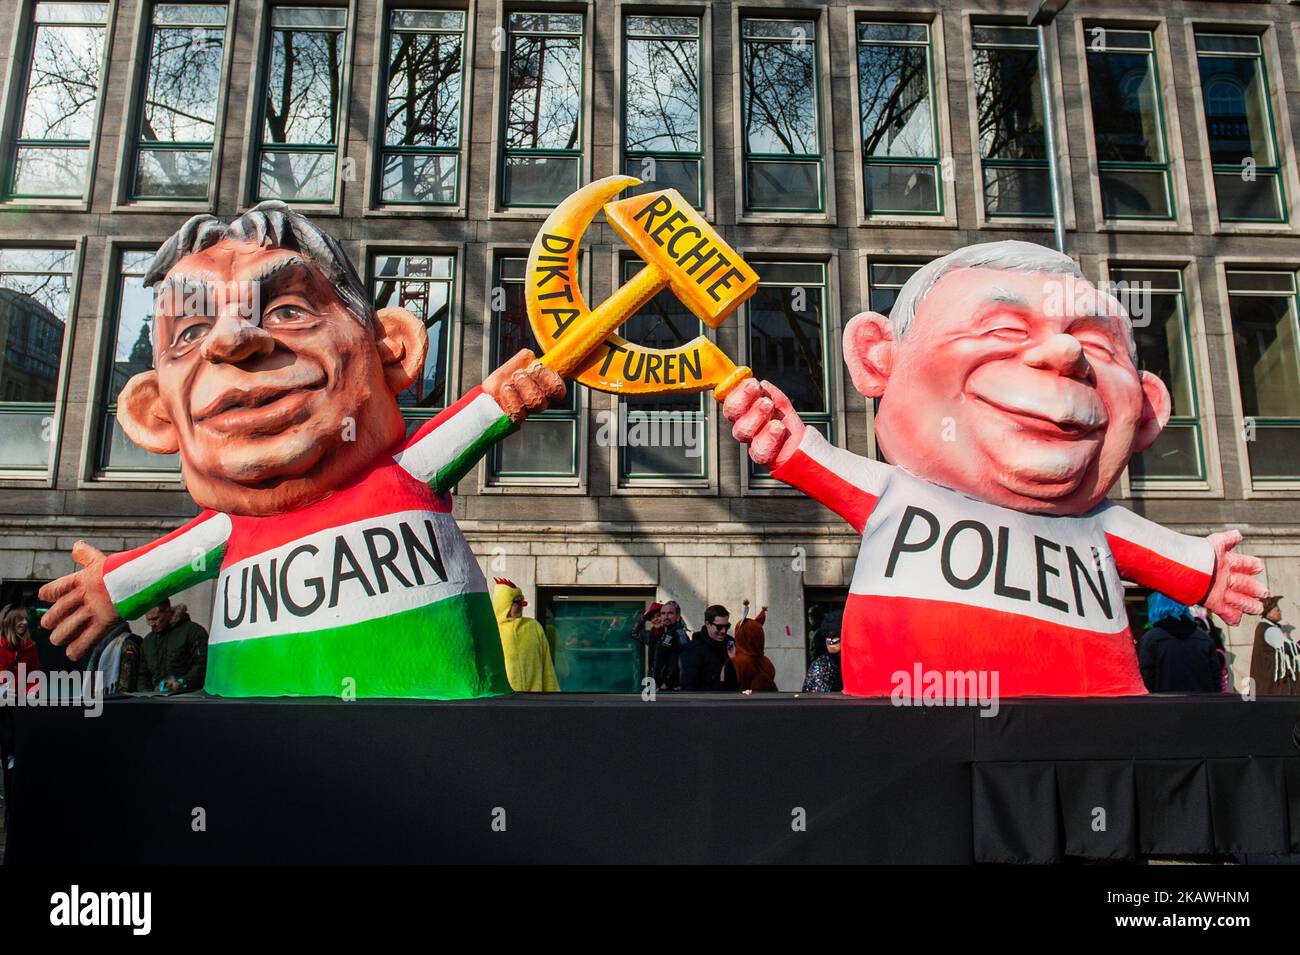 A float featuring Prime Minister of Hungary Viktor Orban (L) and leader of Poland, Jaroslaw Kaczynski (R), is seen prior to the annual Rose Monday parade on February 12, 2018 in Dusseldorf, Germany. Political satire is a traditional cornerstone of the annual parades. More than 30 music ensembles and 5,000 participants join the procession through the city. Elaborately built and decorated floats address cultural and political issues and can be satirical, hilarious and even controversial. The politically themed floats of satirist Jacques Tilly are famous the world over. (Photo by Romy Arroyo Fern Stock Photo